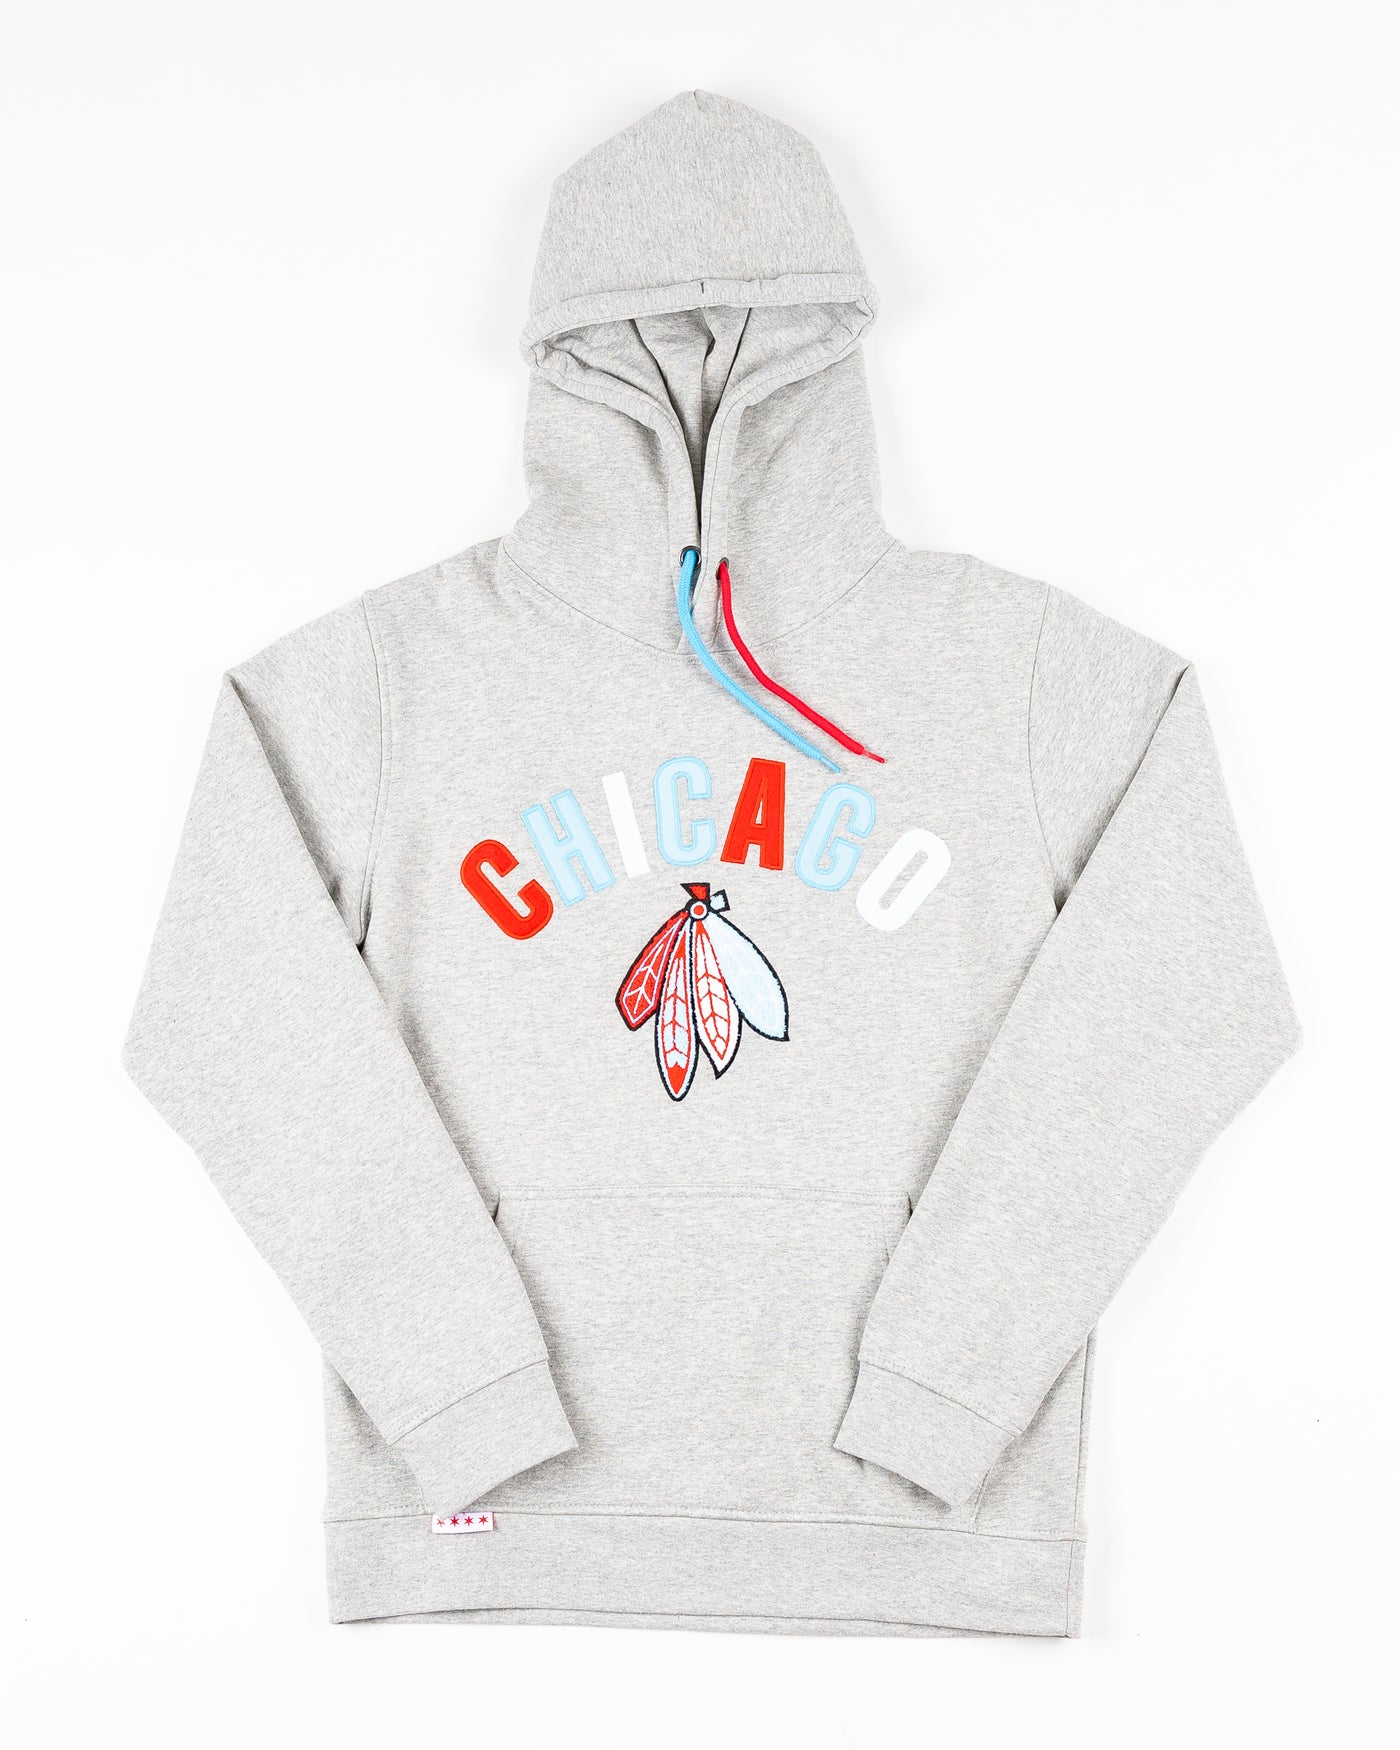 grey hoodie with Chicago wordmark and Chicago Blackhawks four feathers logo embroidered across front - front lay flat